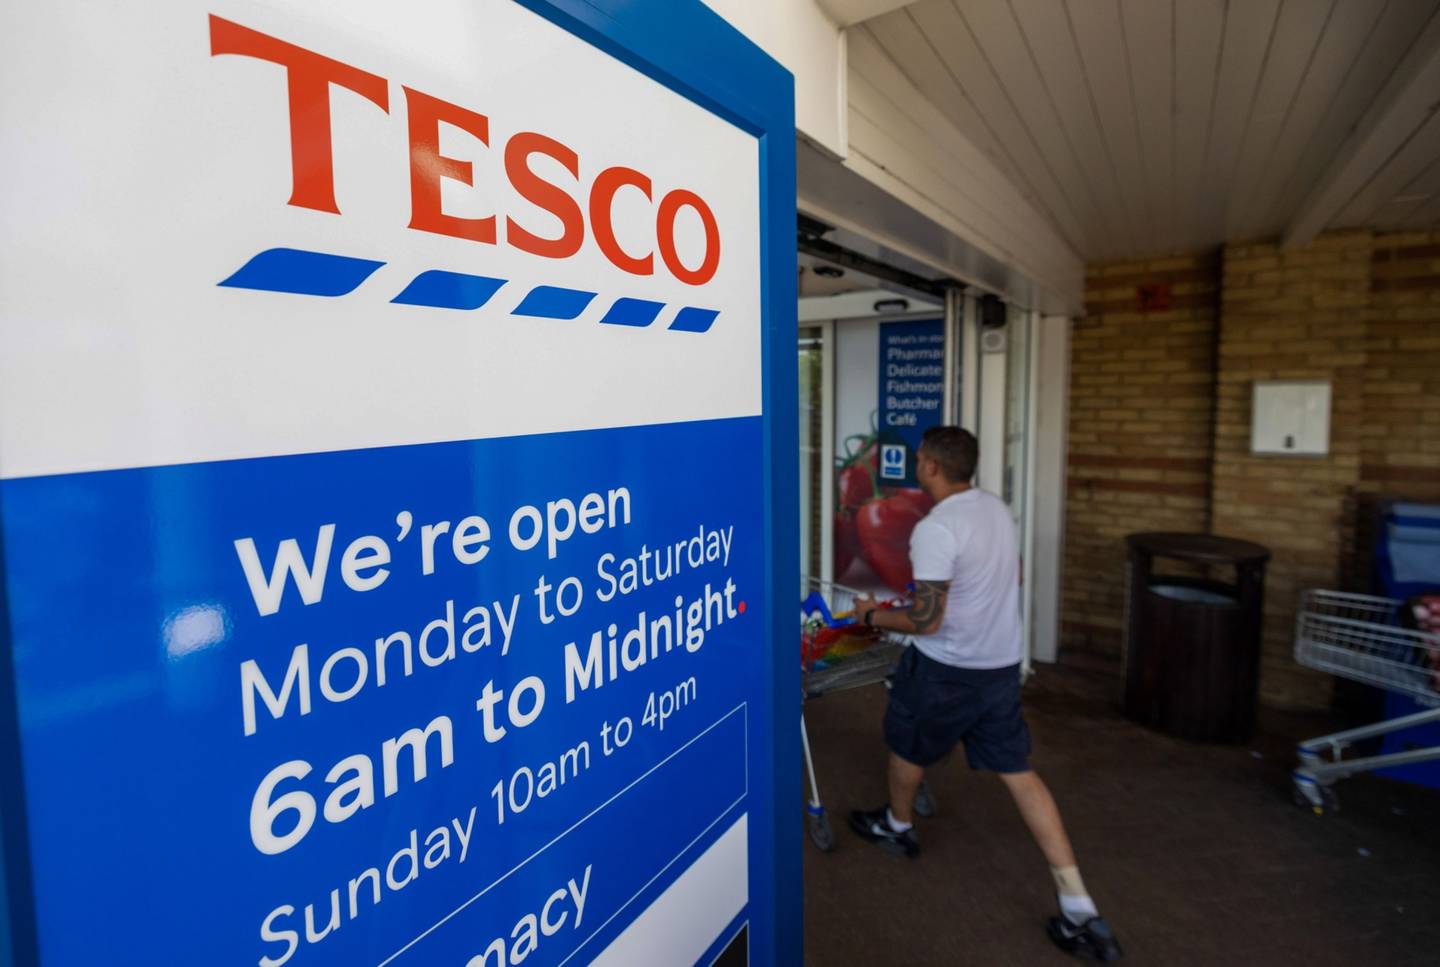 Tesco said its customers are cutting back on luxury items and switching to cheaper brands. Bloomberg
